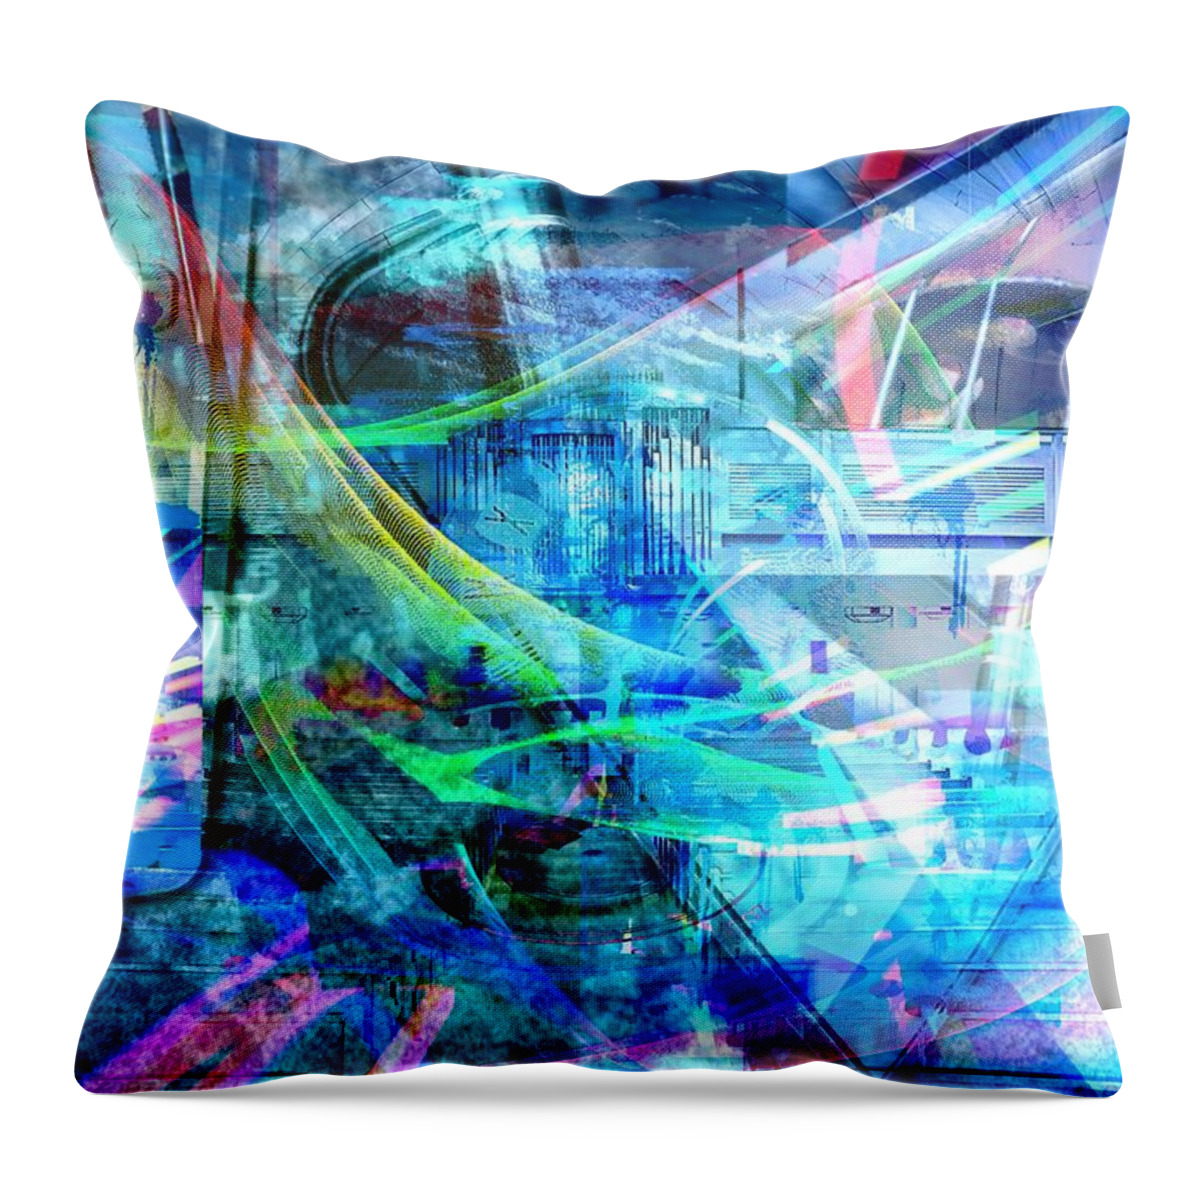 Abstract Throw Pillow featuring the digital art Blue Smile by Art Di